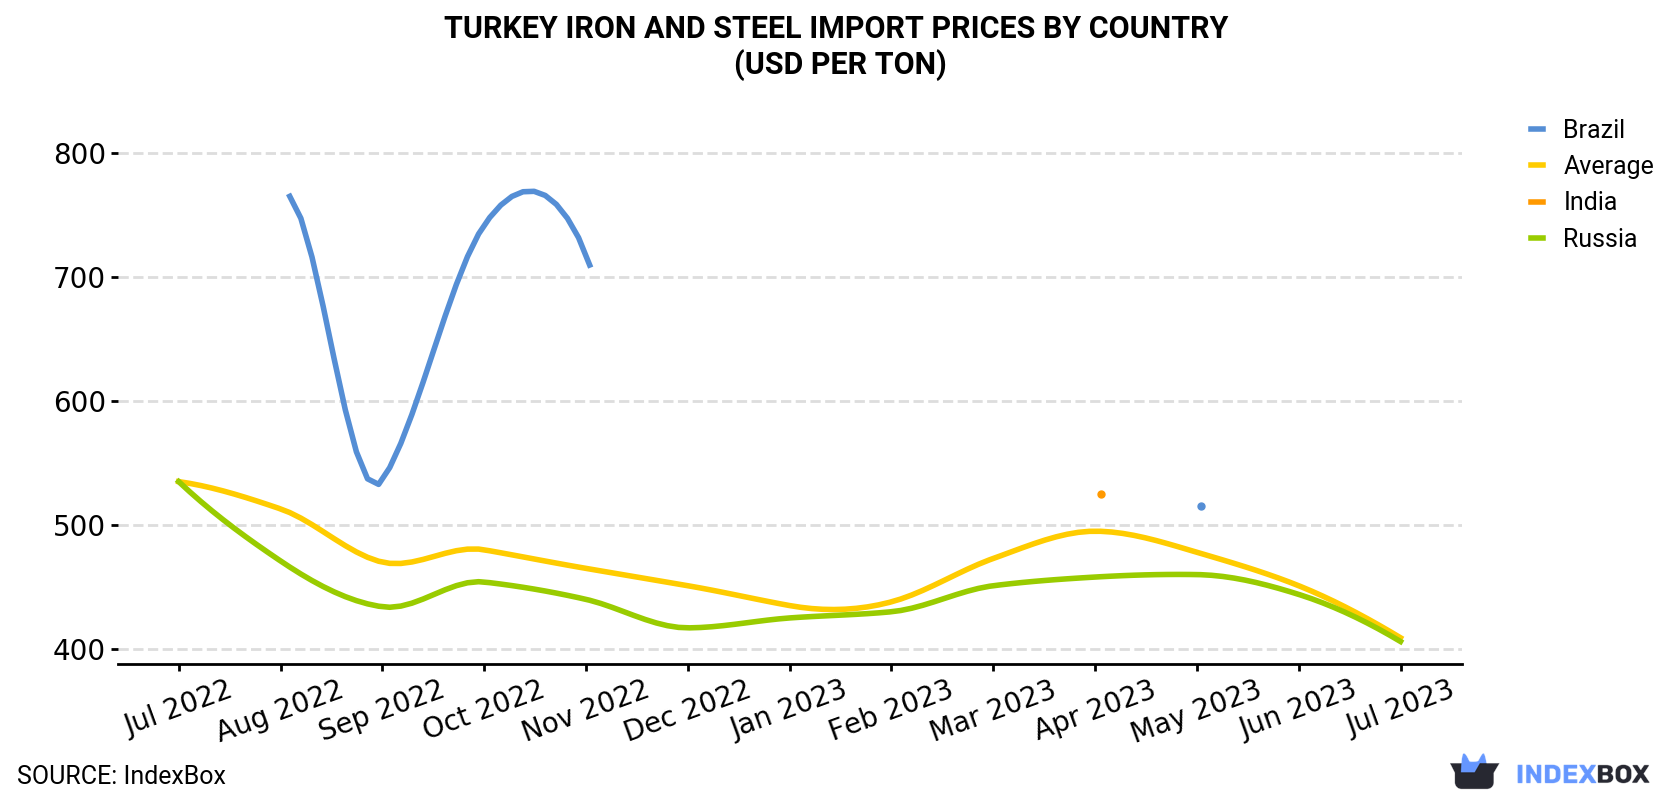 Turkey Iron and Steel Import Prices By Country (USD Per Ton)